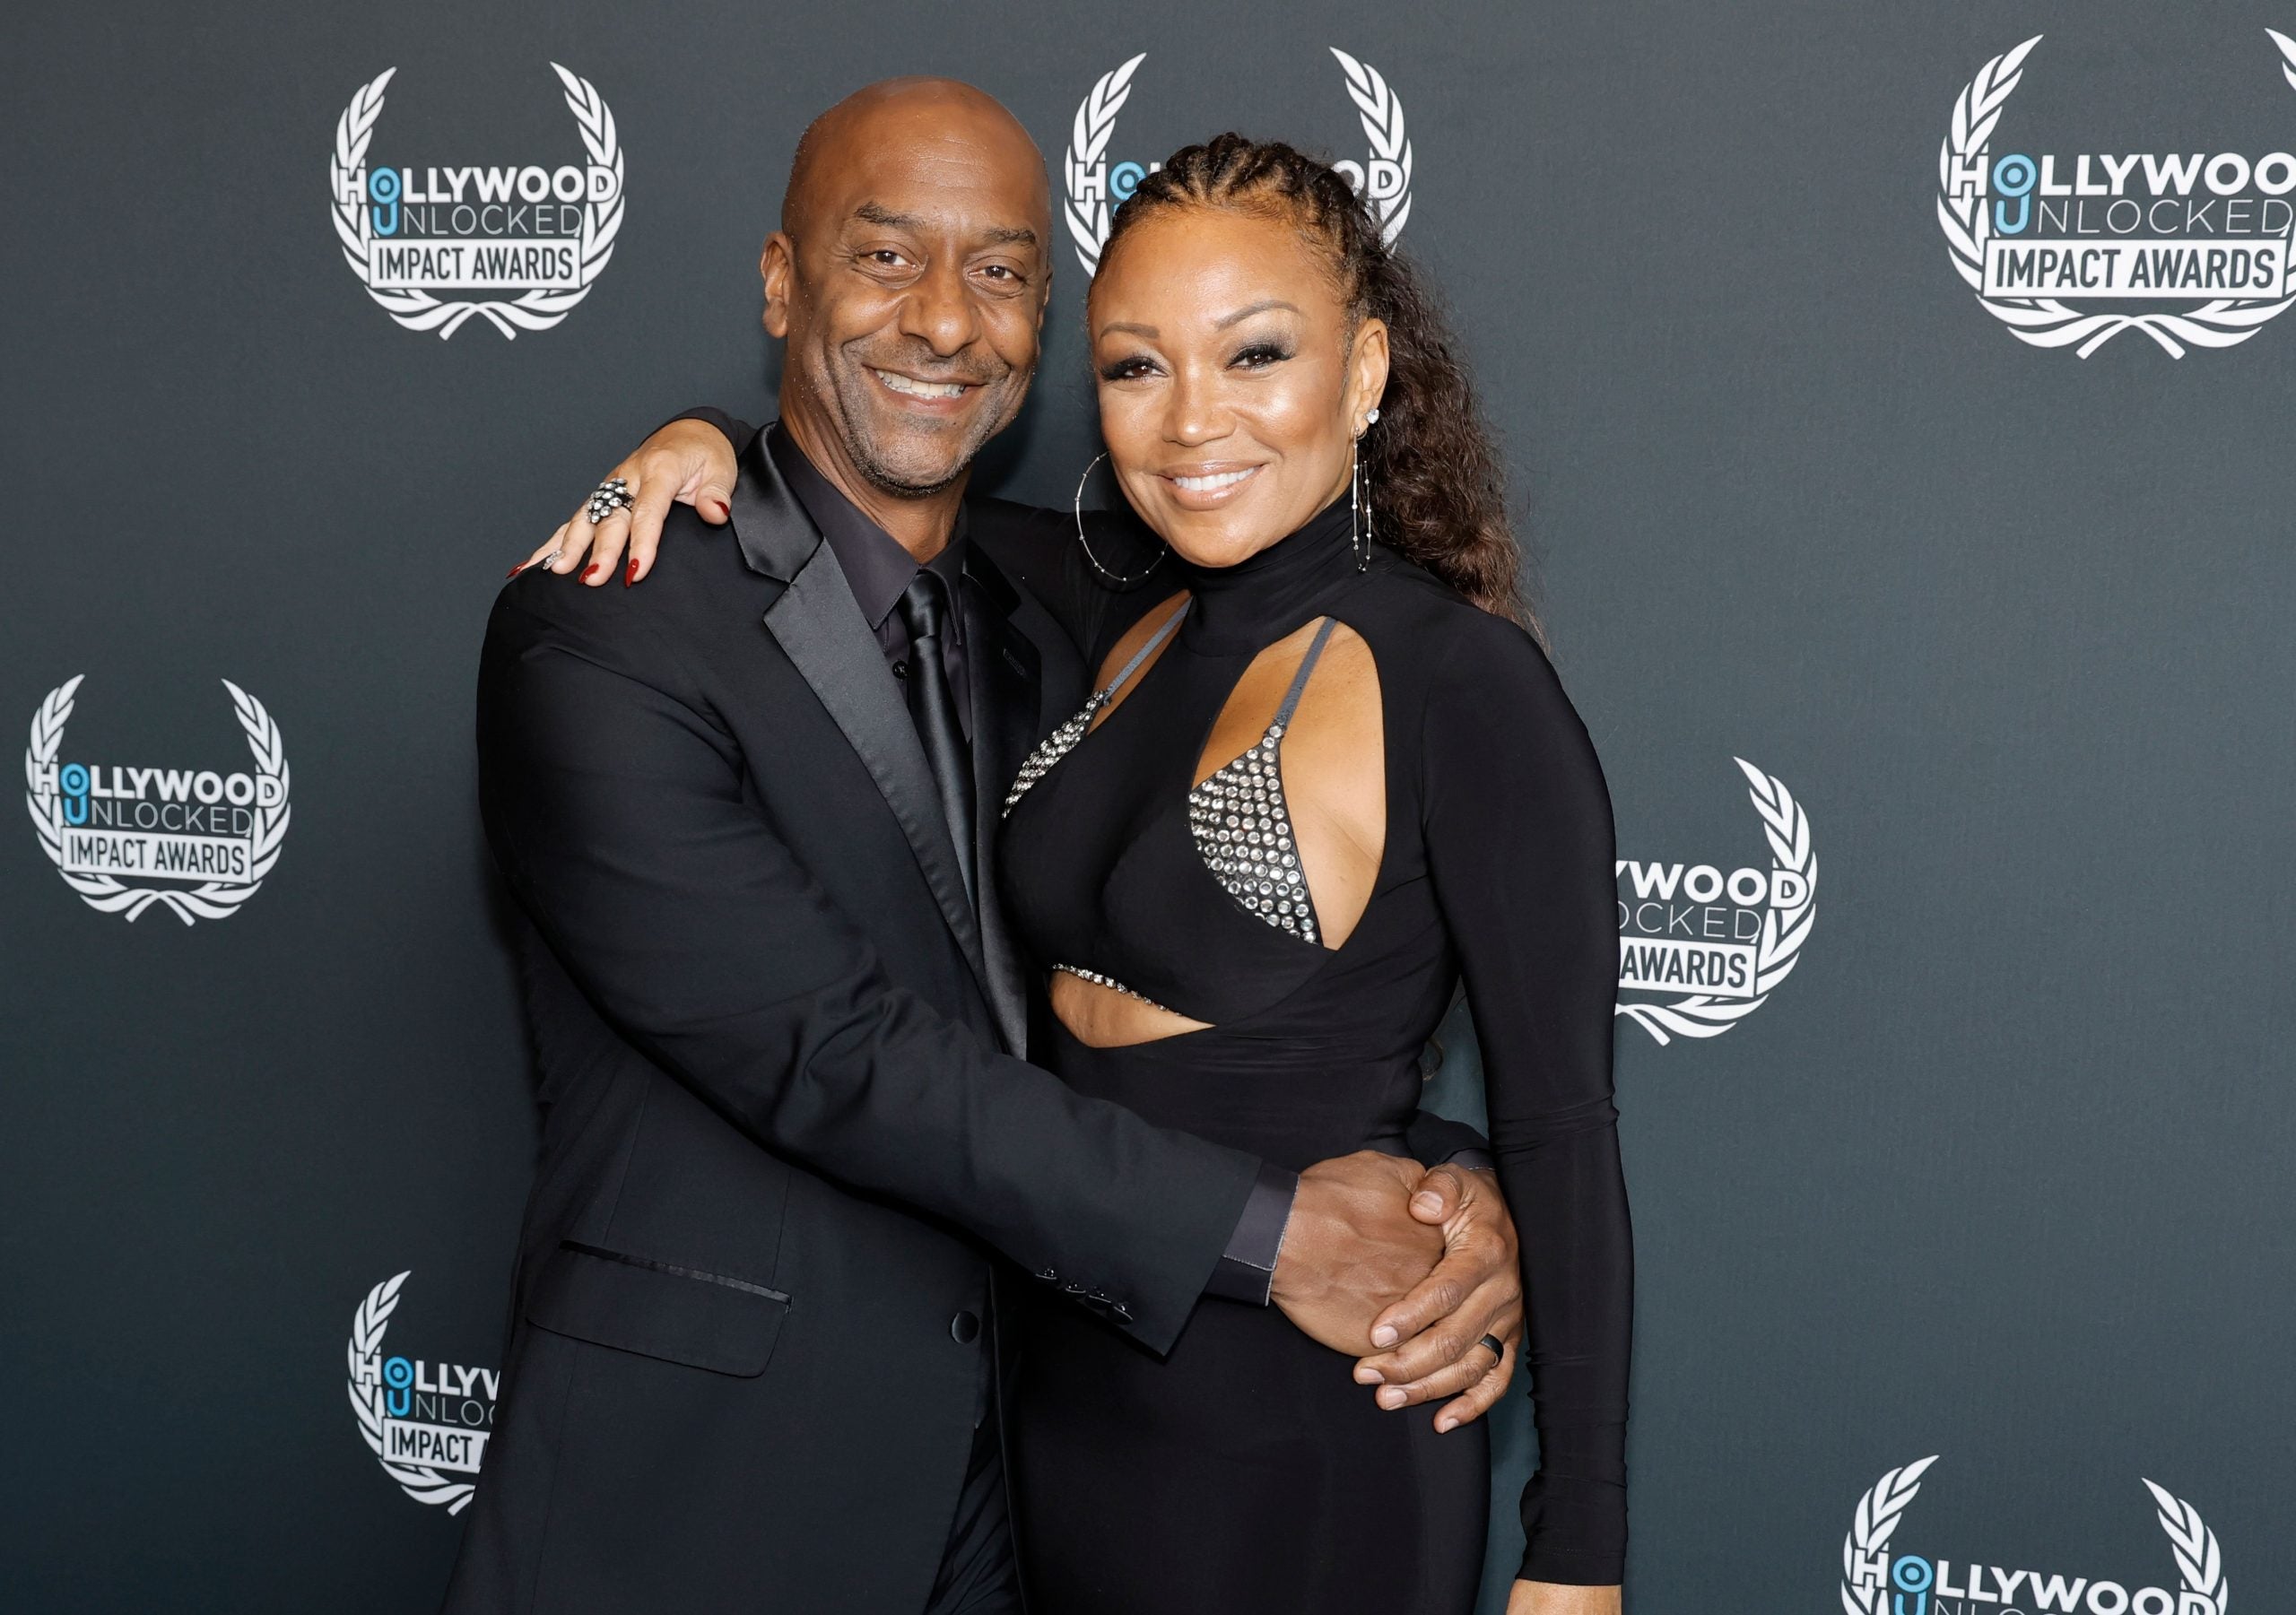 Chanté Moore And Stephen Hill Just Celebrated Their First Wedding Anniversary: ‘My Dearest Heart’